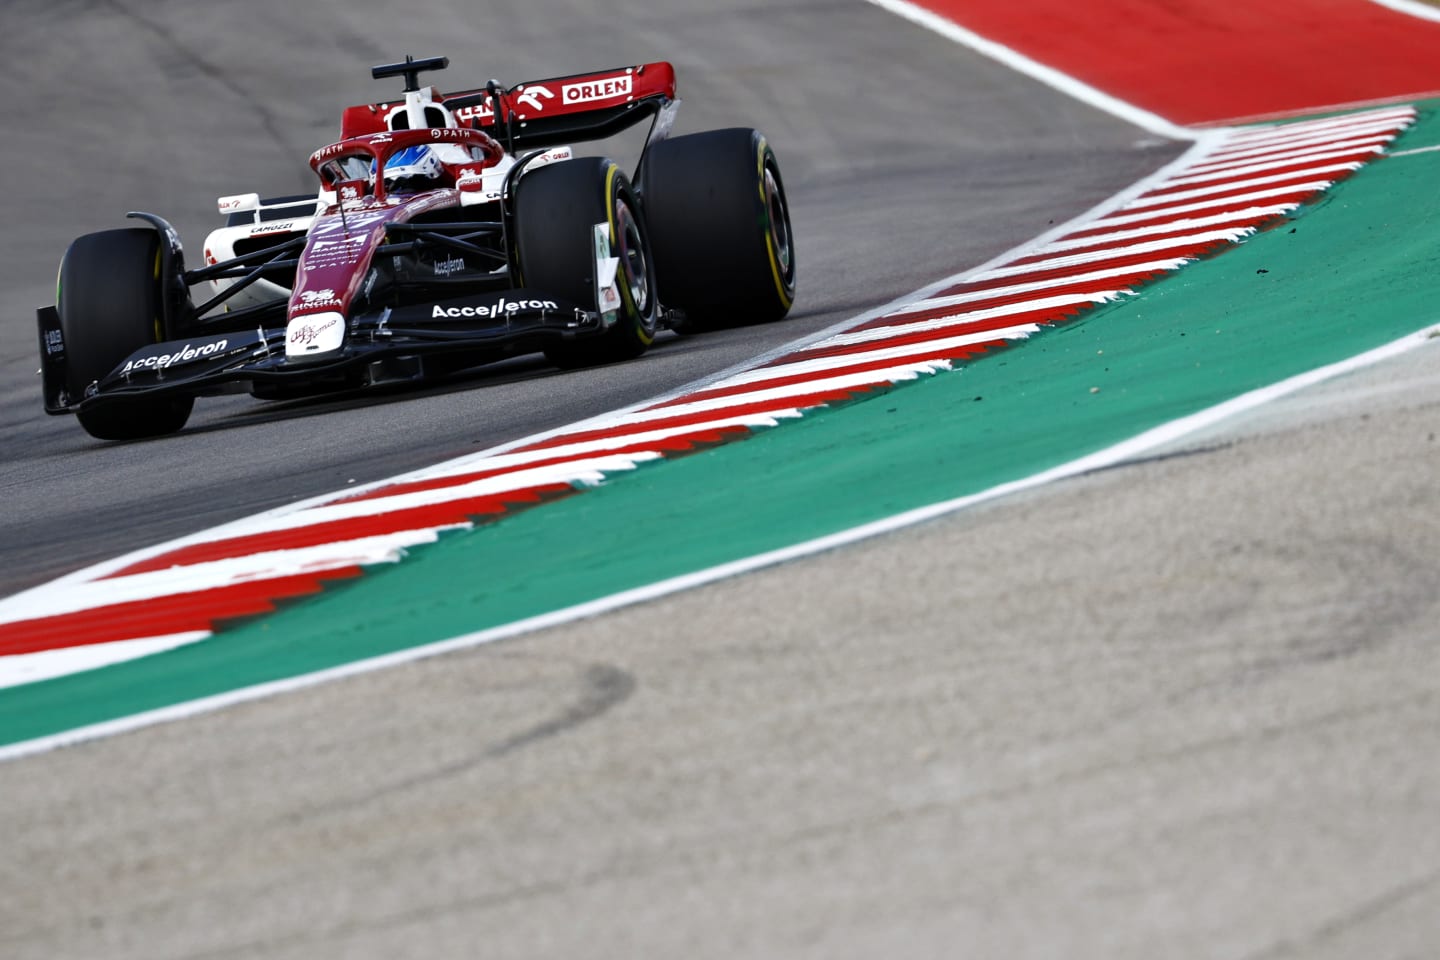 AUSTIN, TEXAS - OCTOBER 23: Valtteri Bottas of Finland driving the (77) Alfa Romeo F1 C42 Ferrari on track during the F1 Grand Prix of USA at Circuit of The Americas on October 23, 2022 in Austin, Texas. (Photo by Chris Graythen/Getty Images)